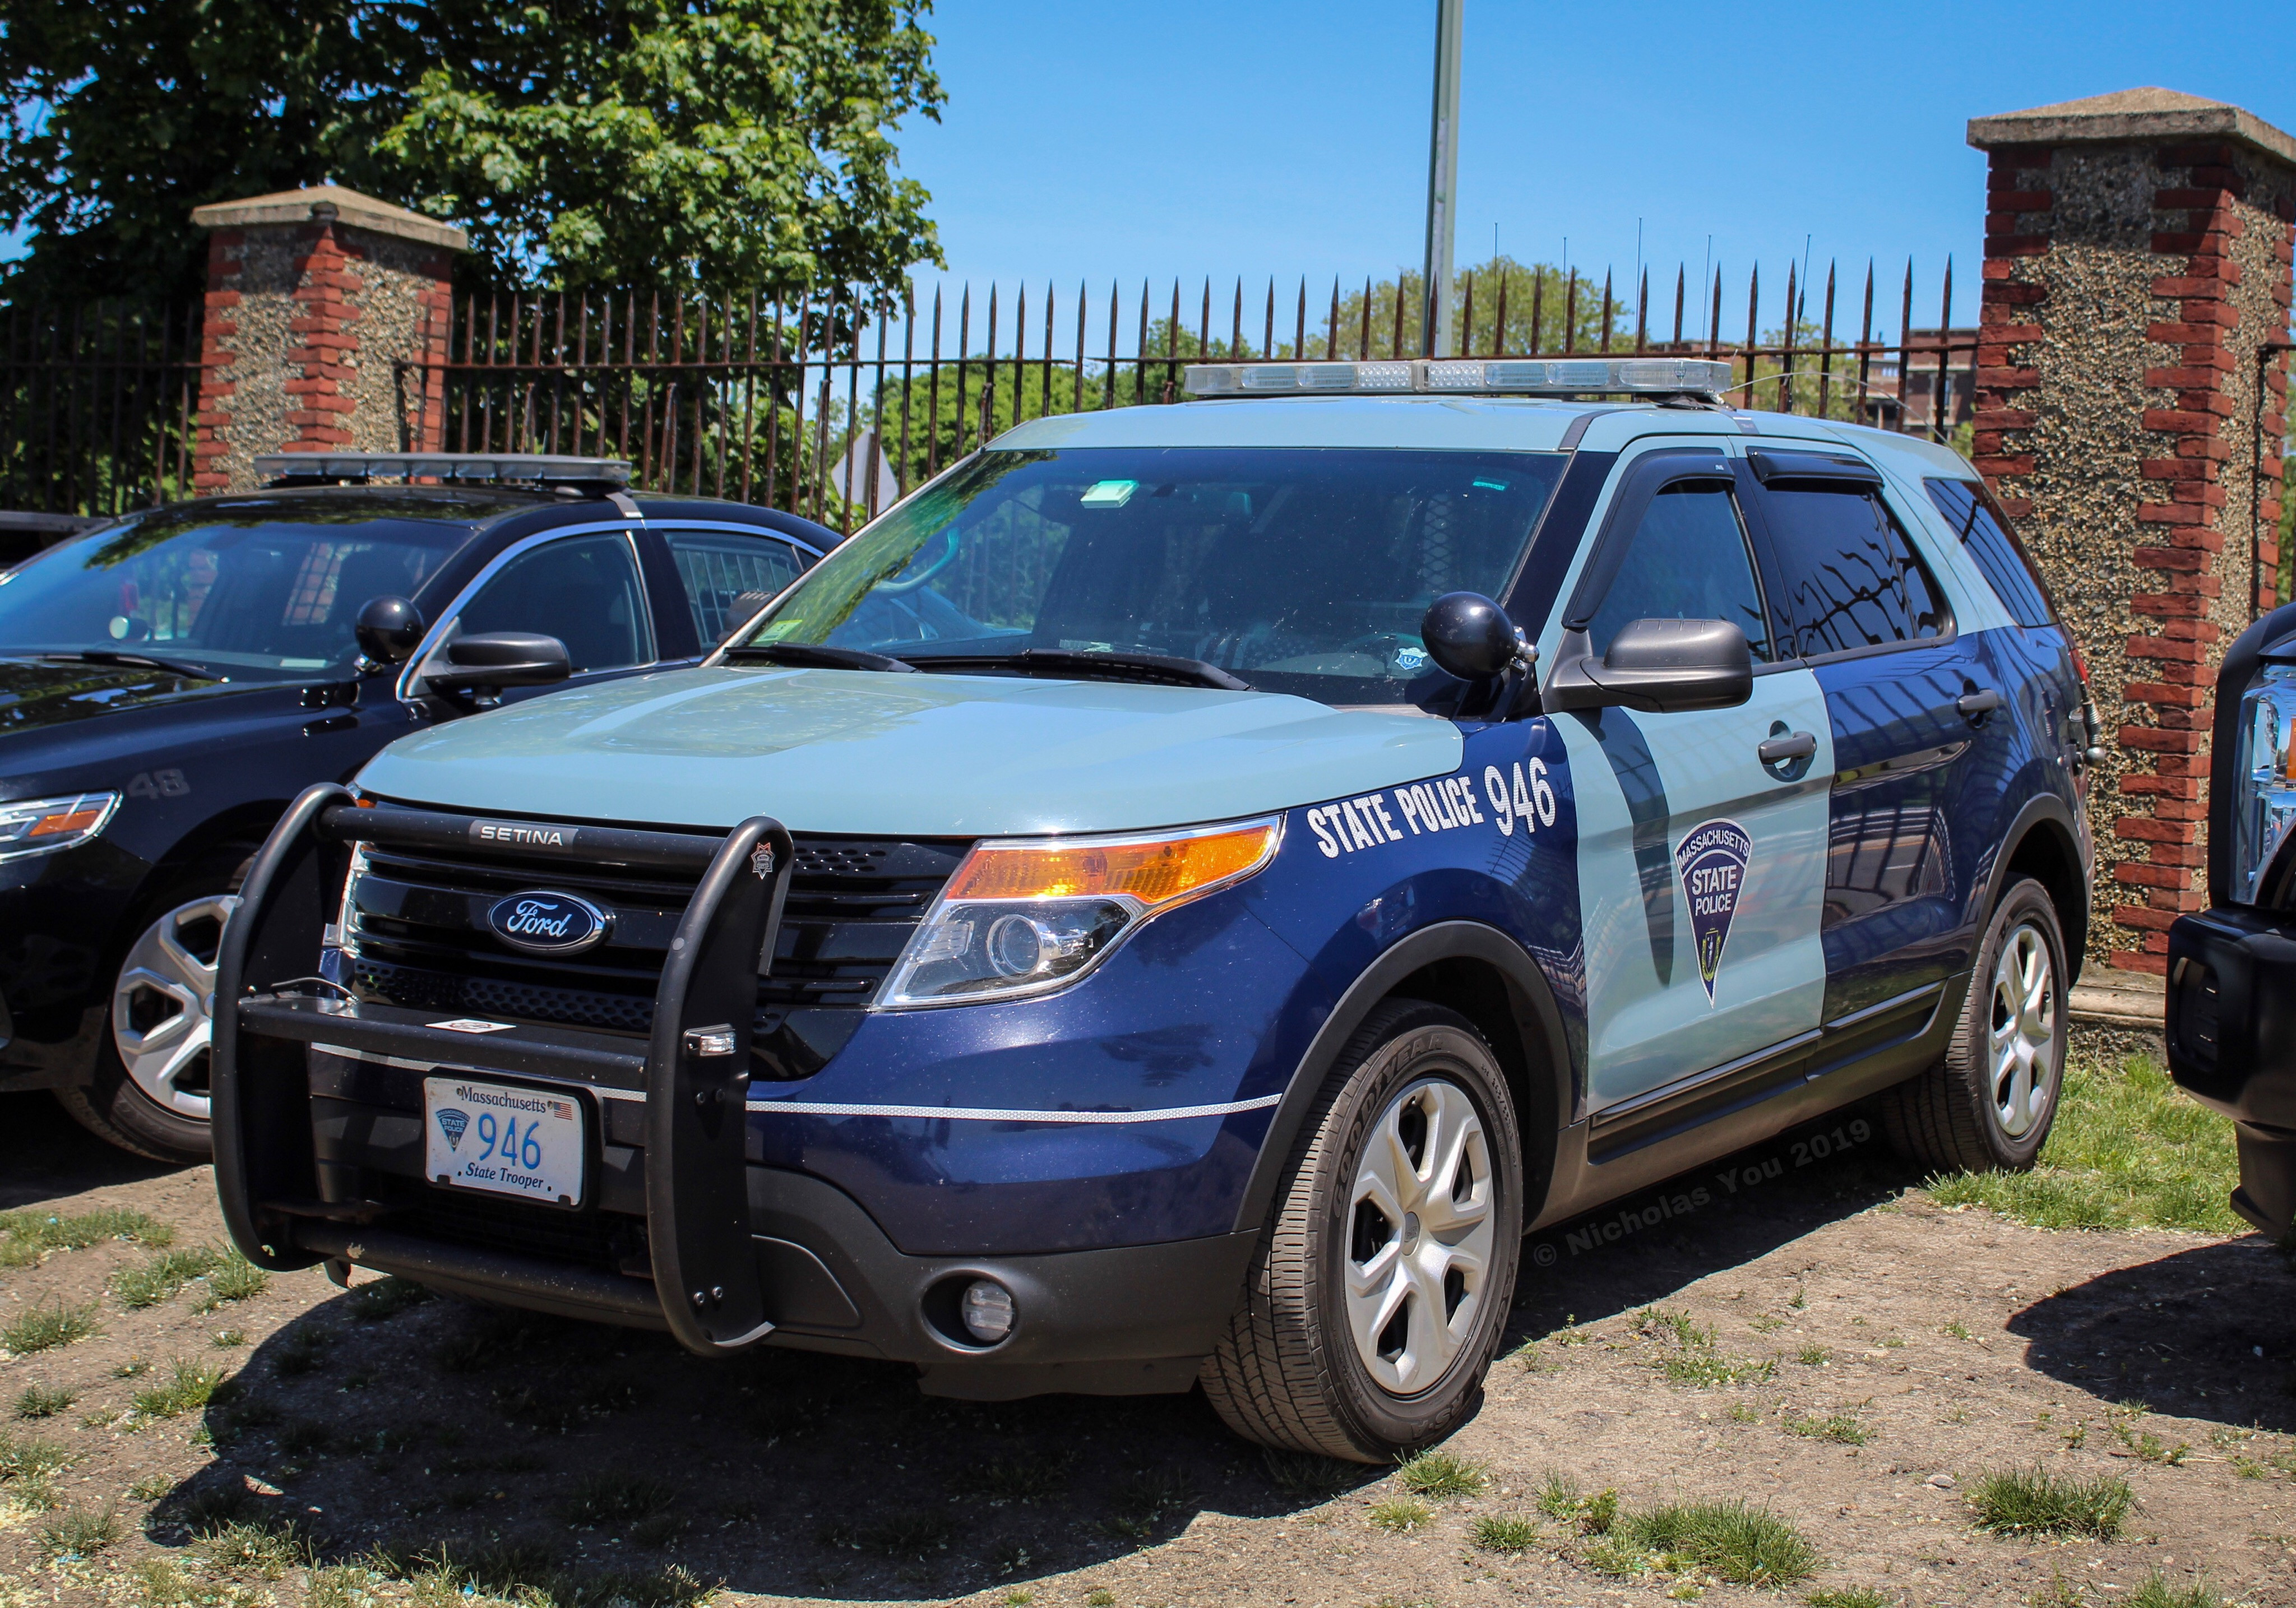 A photo  of Massachusetts State Police
            Cruiser 946, a 2015 Ford Police Interceptor Utility             taken by Nicholas You